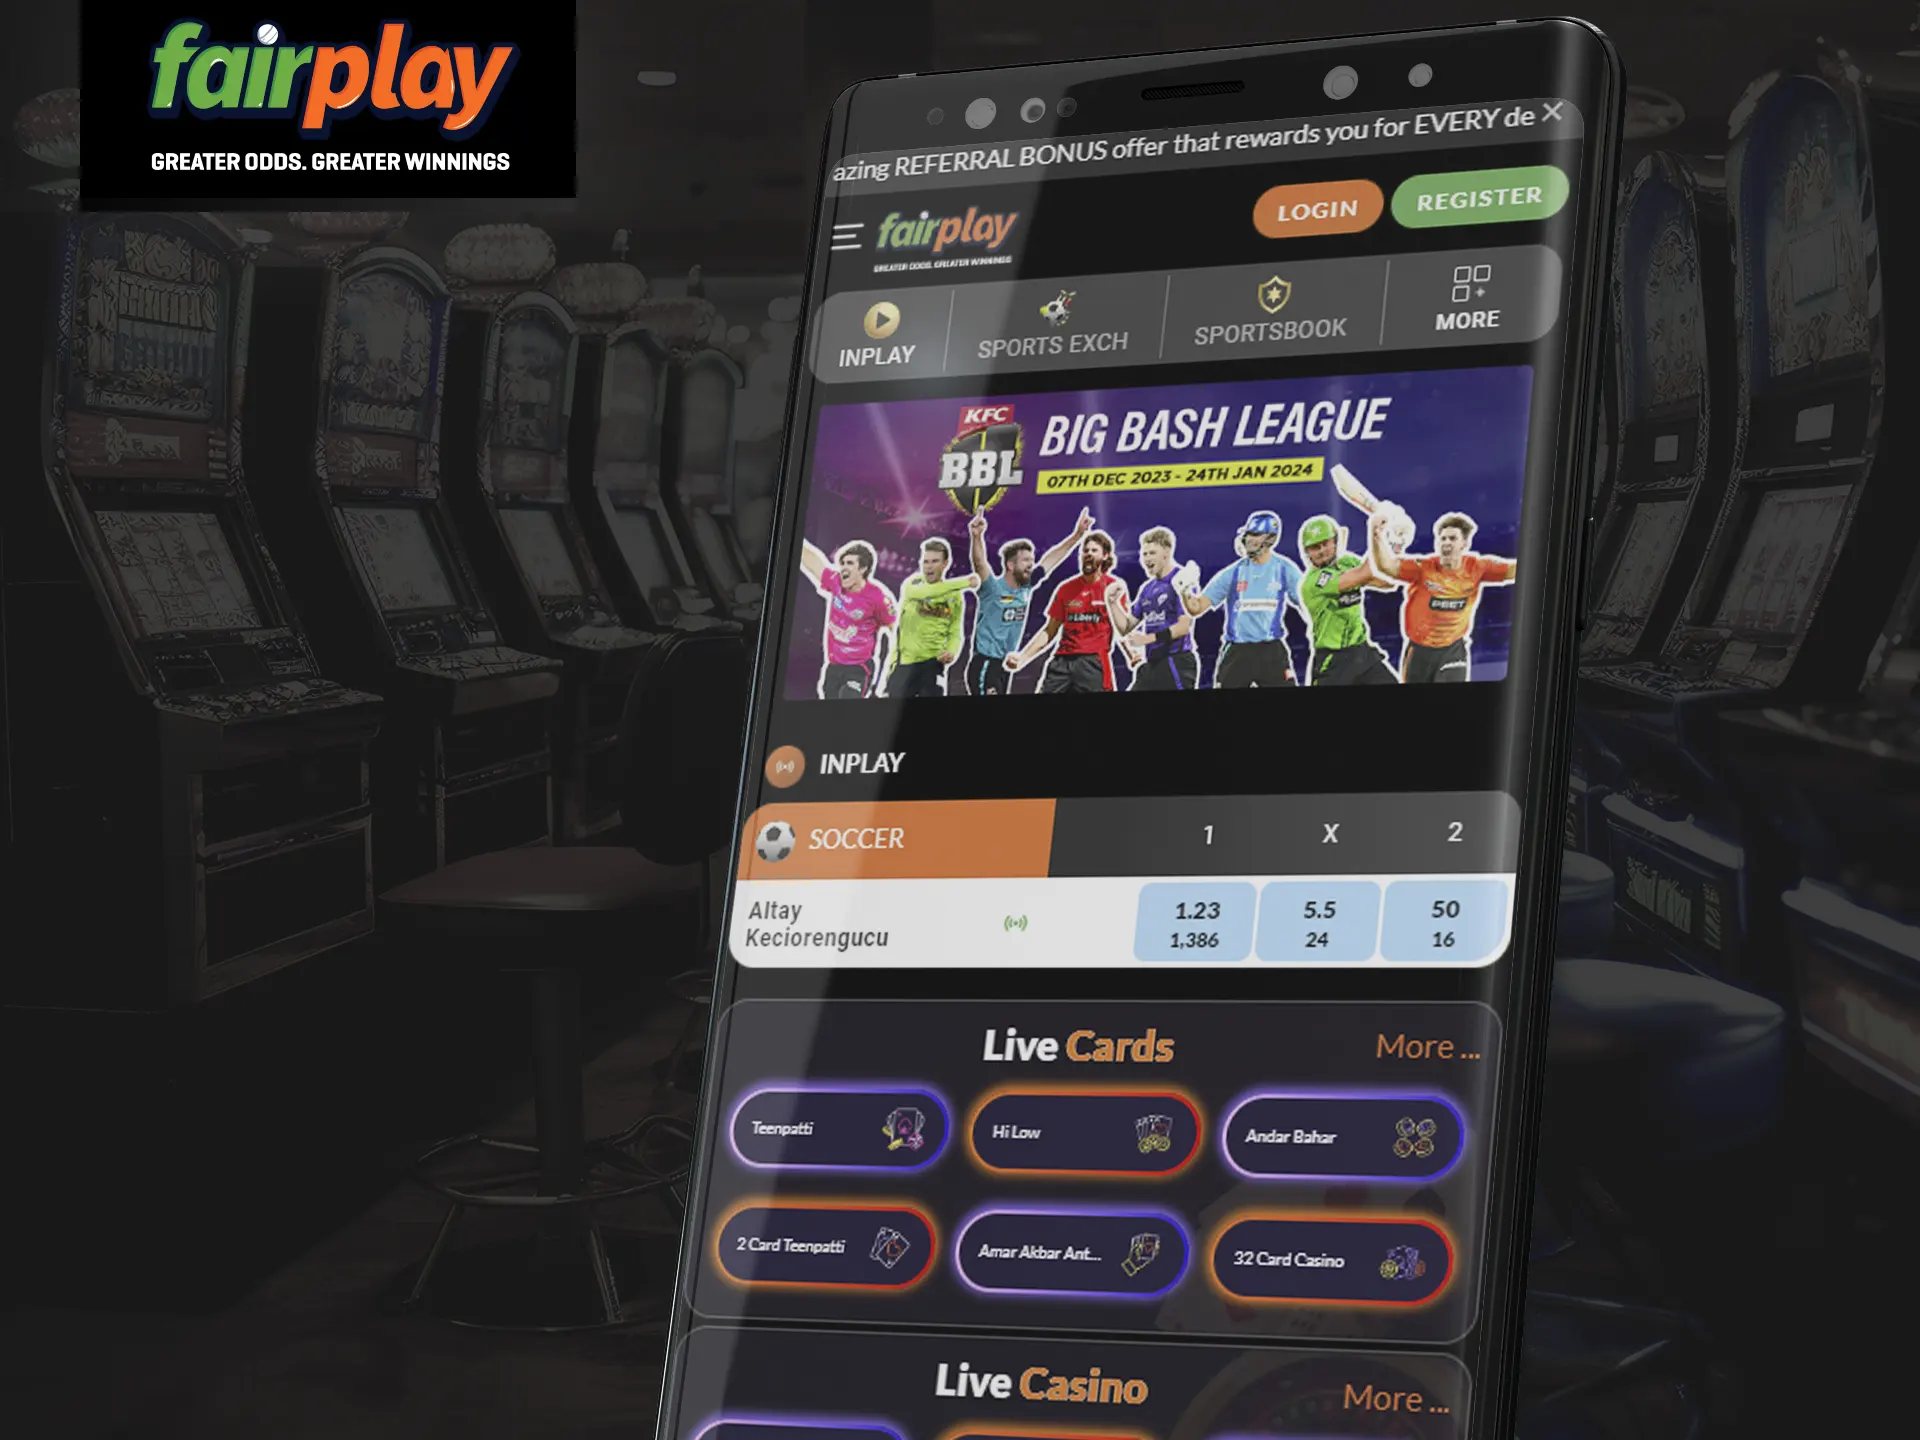 Visit Fairplay through browser on mobile app for full functionality, games, and support.